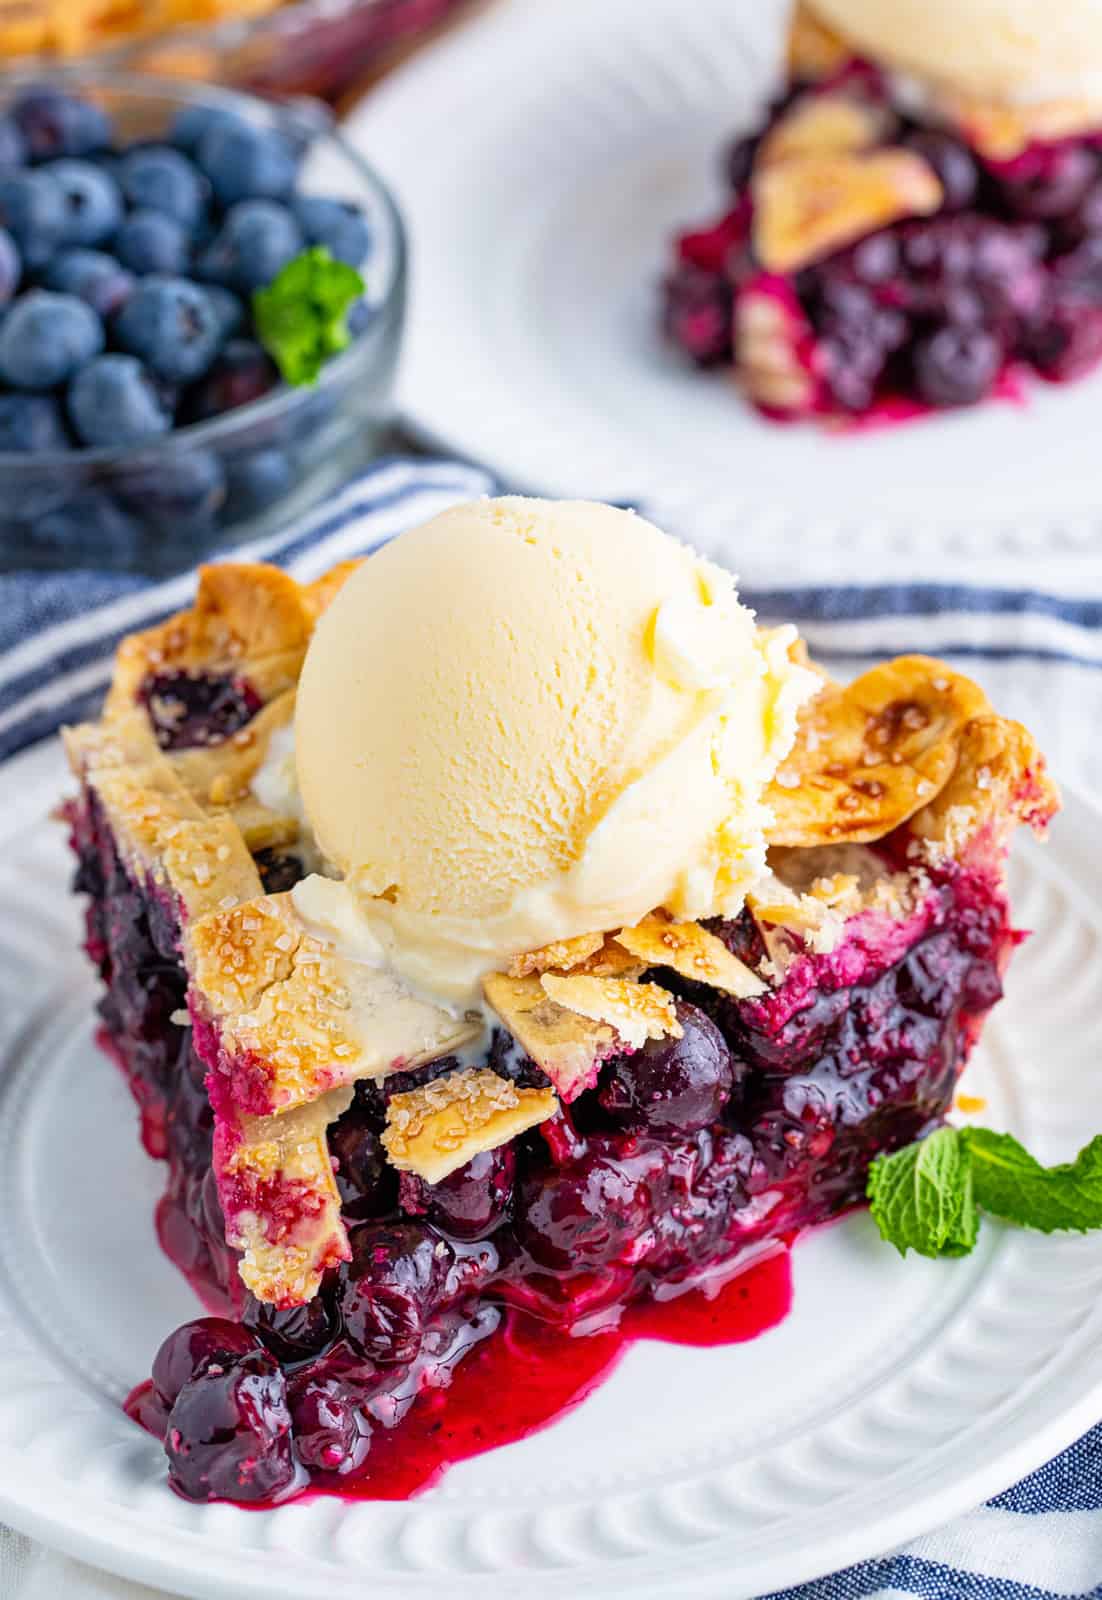 Slice of Blueberry Pie on white plate topped with ice cream